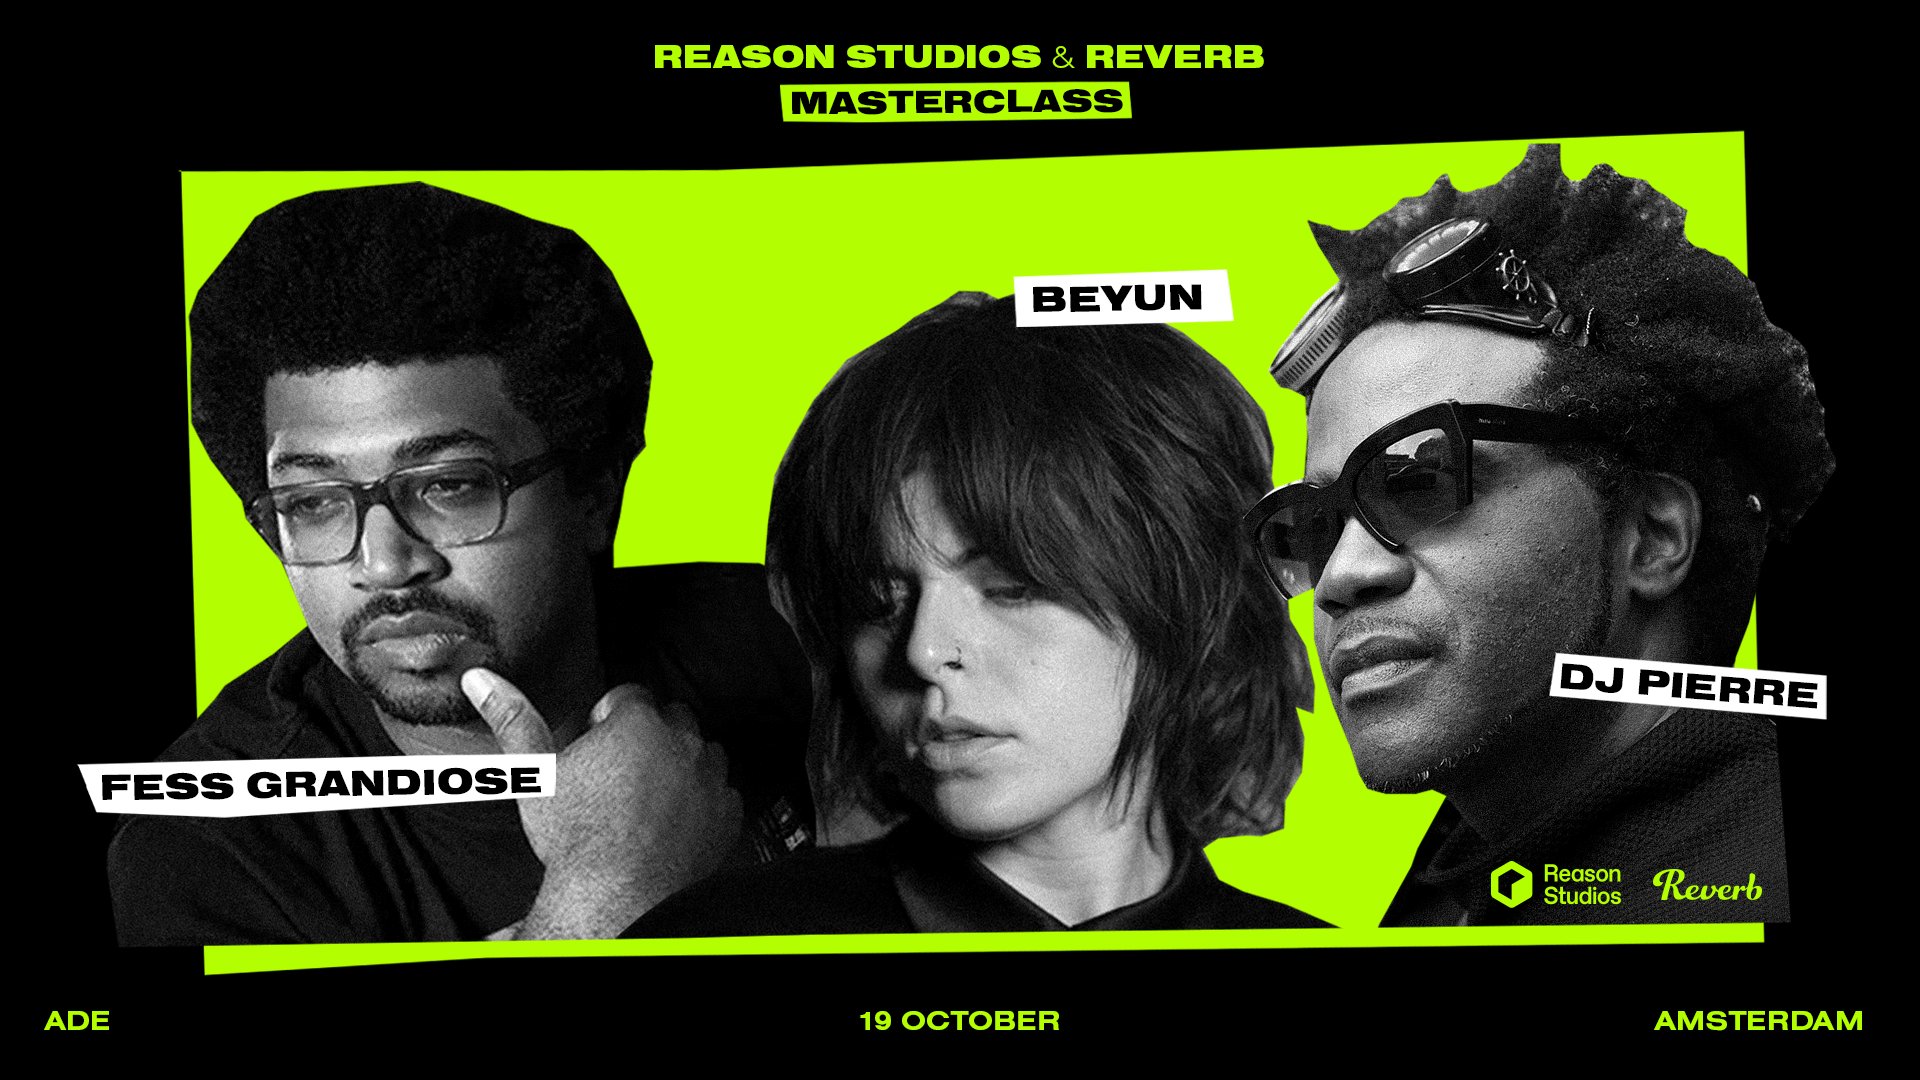 Cover Image for Meet the Reason Team in Amsterdam @ ADE